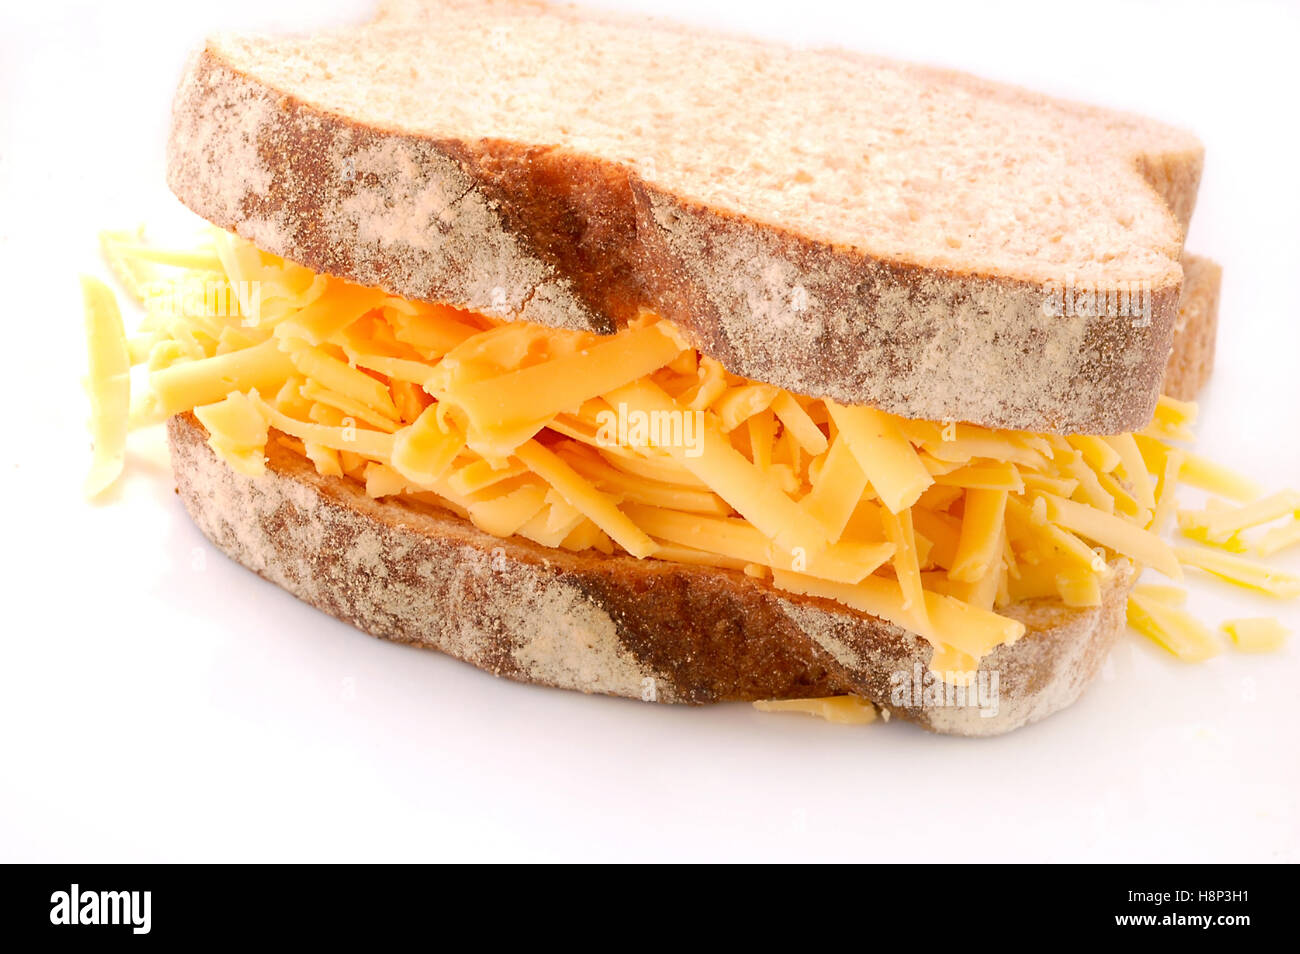 Delicious Cheese Sandwhich on Brown Bread Stock Photo